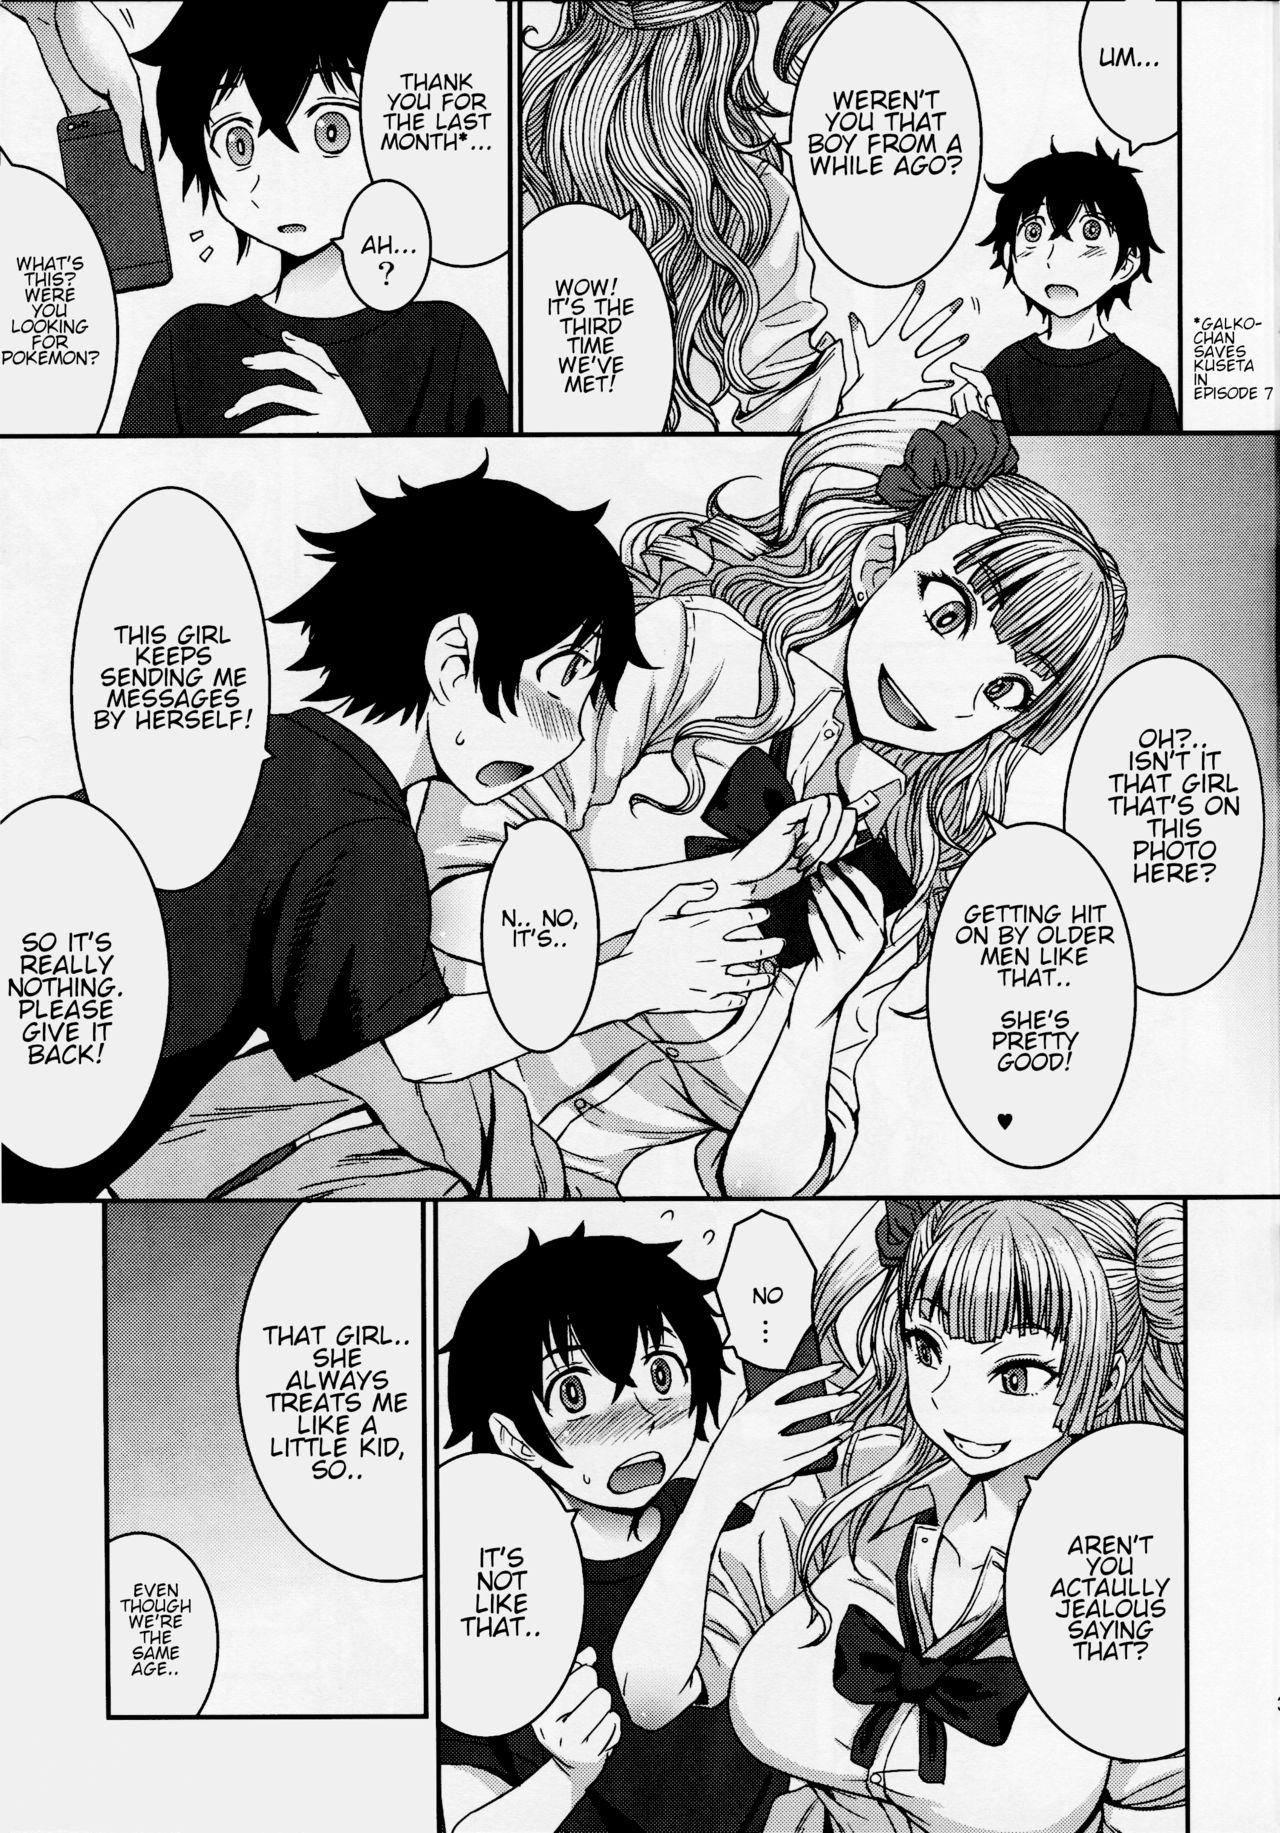 Blond Boy Meets Gal - Oshiete galko-chan Young Petite Porn - Page 4